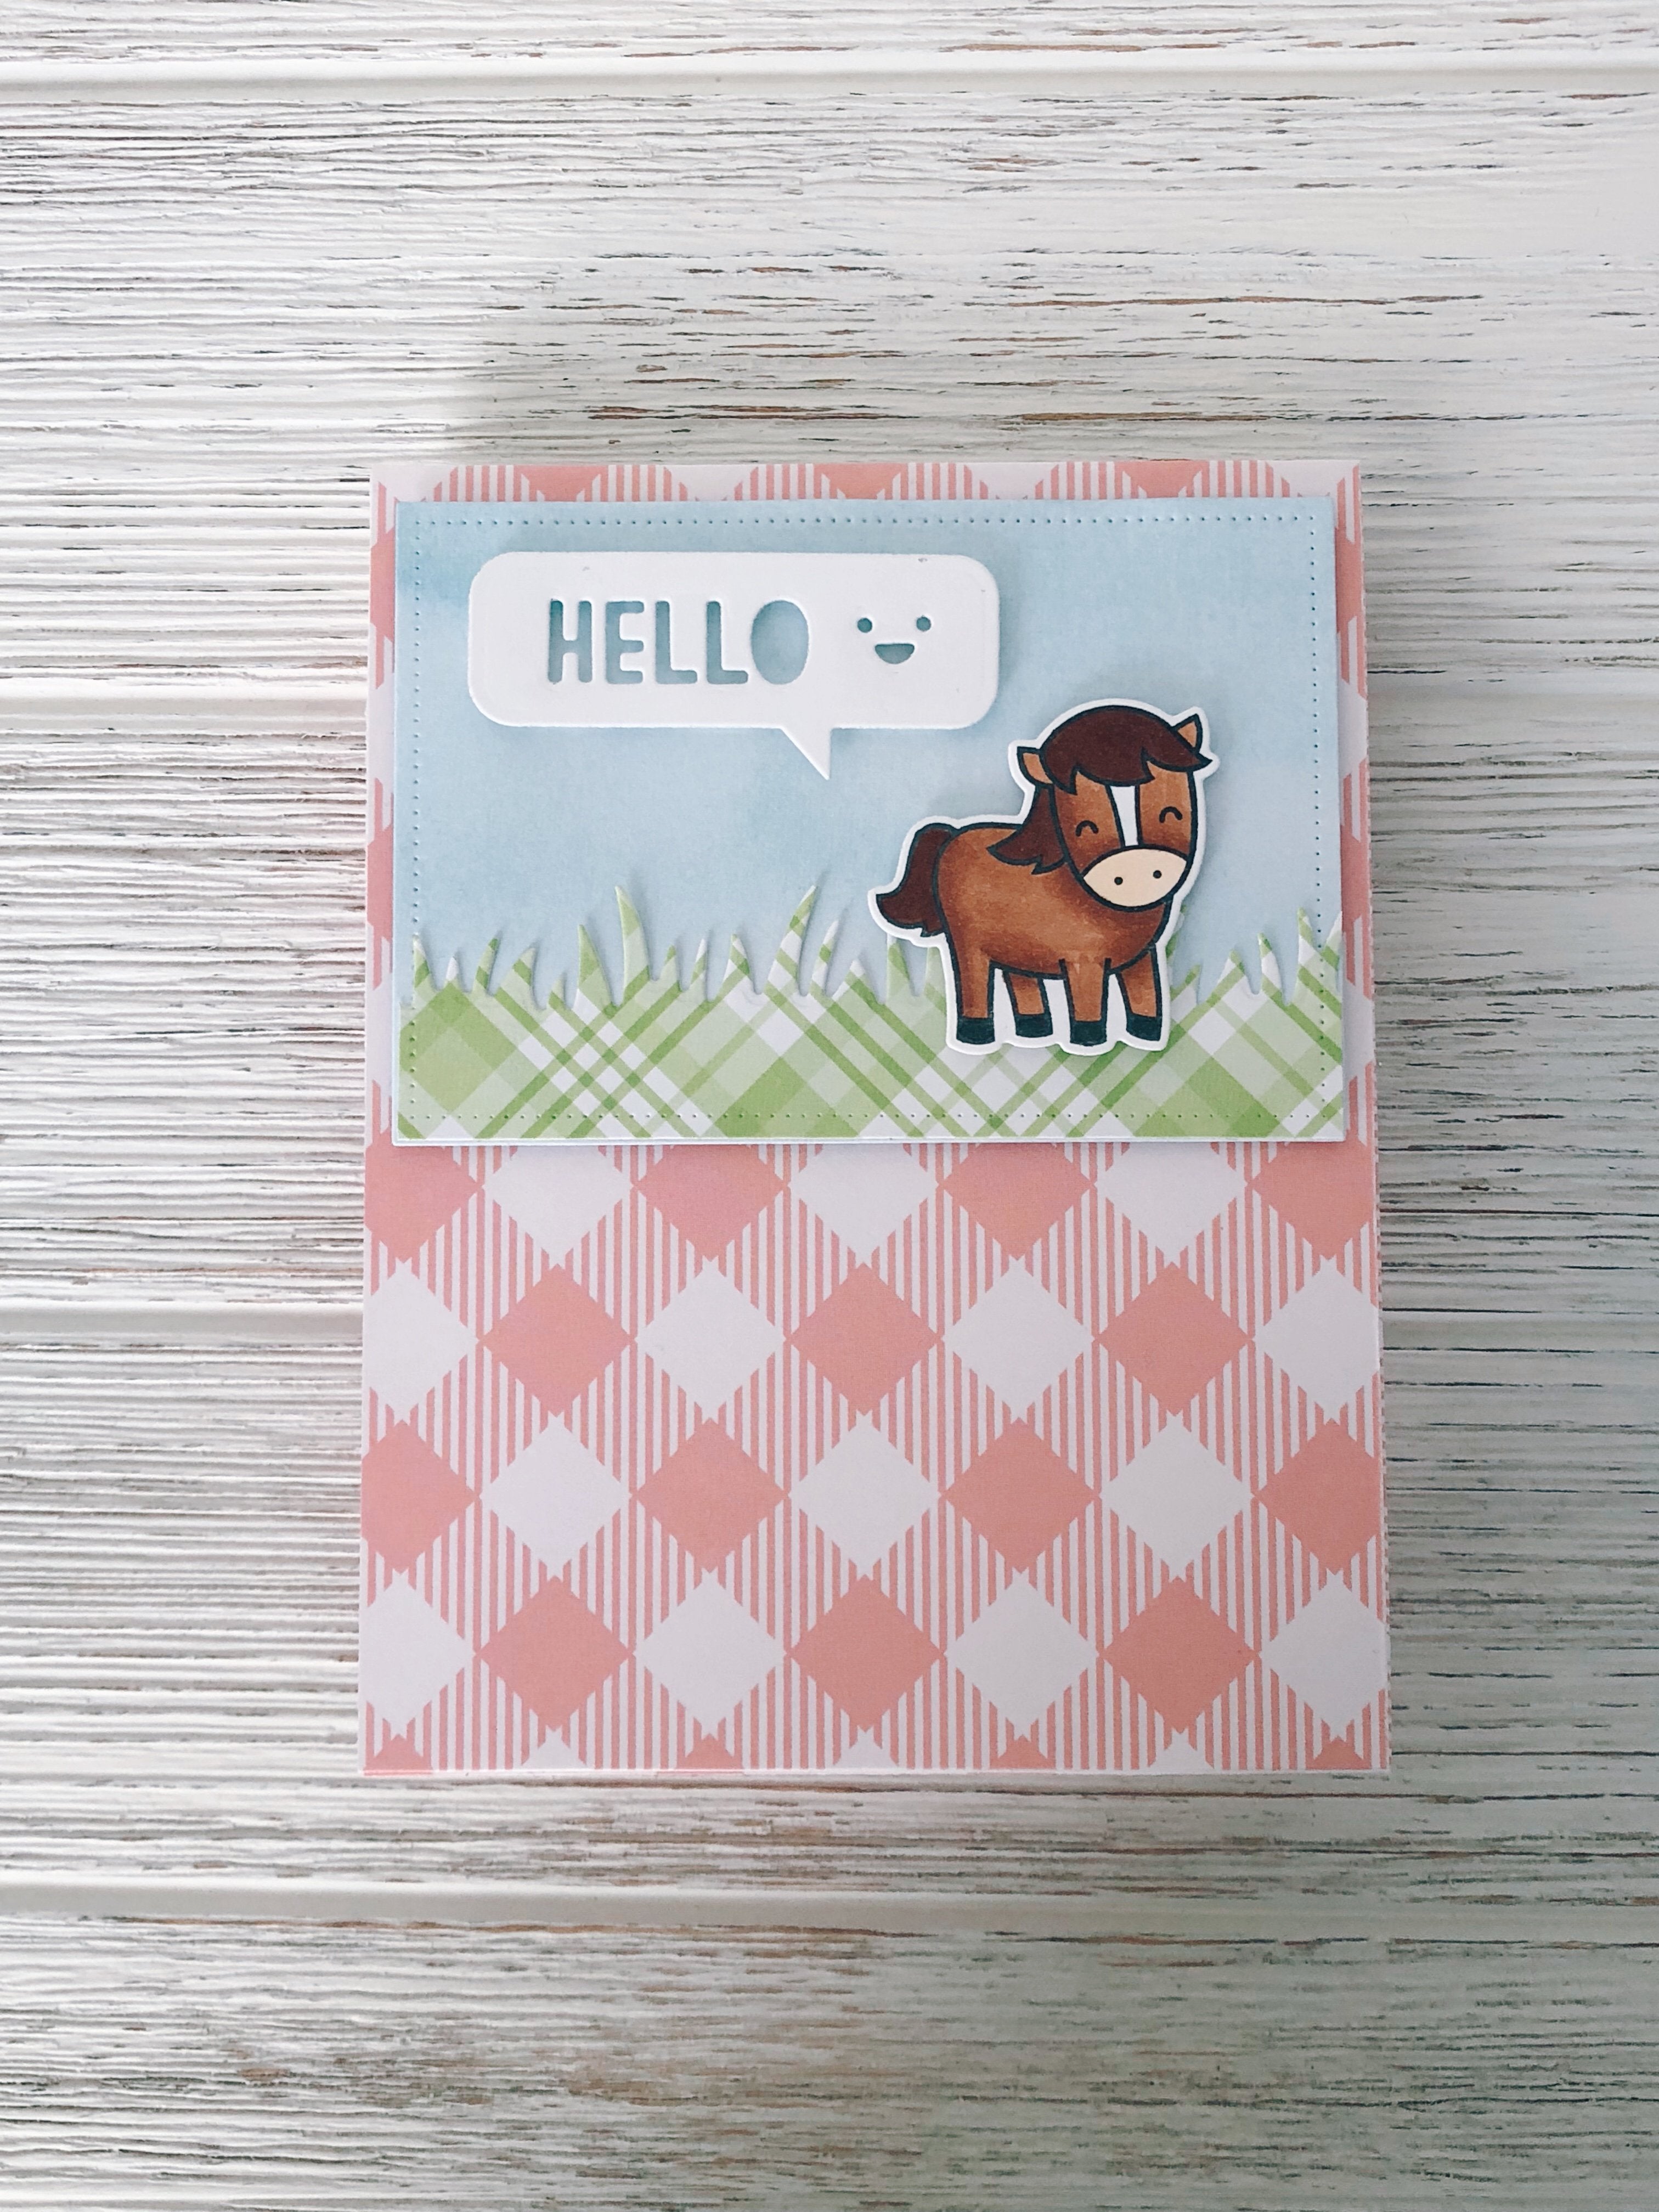 LAWN FAWN Acrylic Stamping Block: 4x5 w/Grip and Grid - Scrapbook Generation